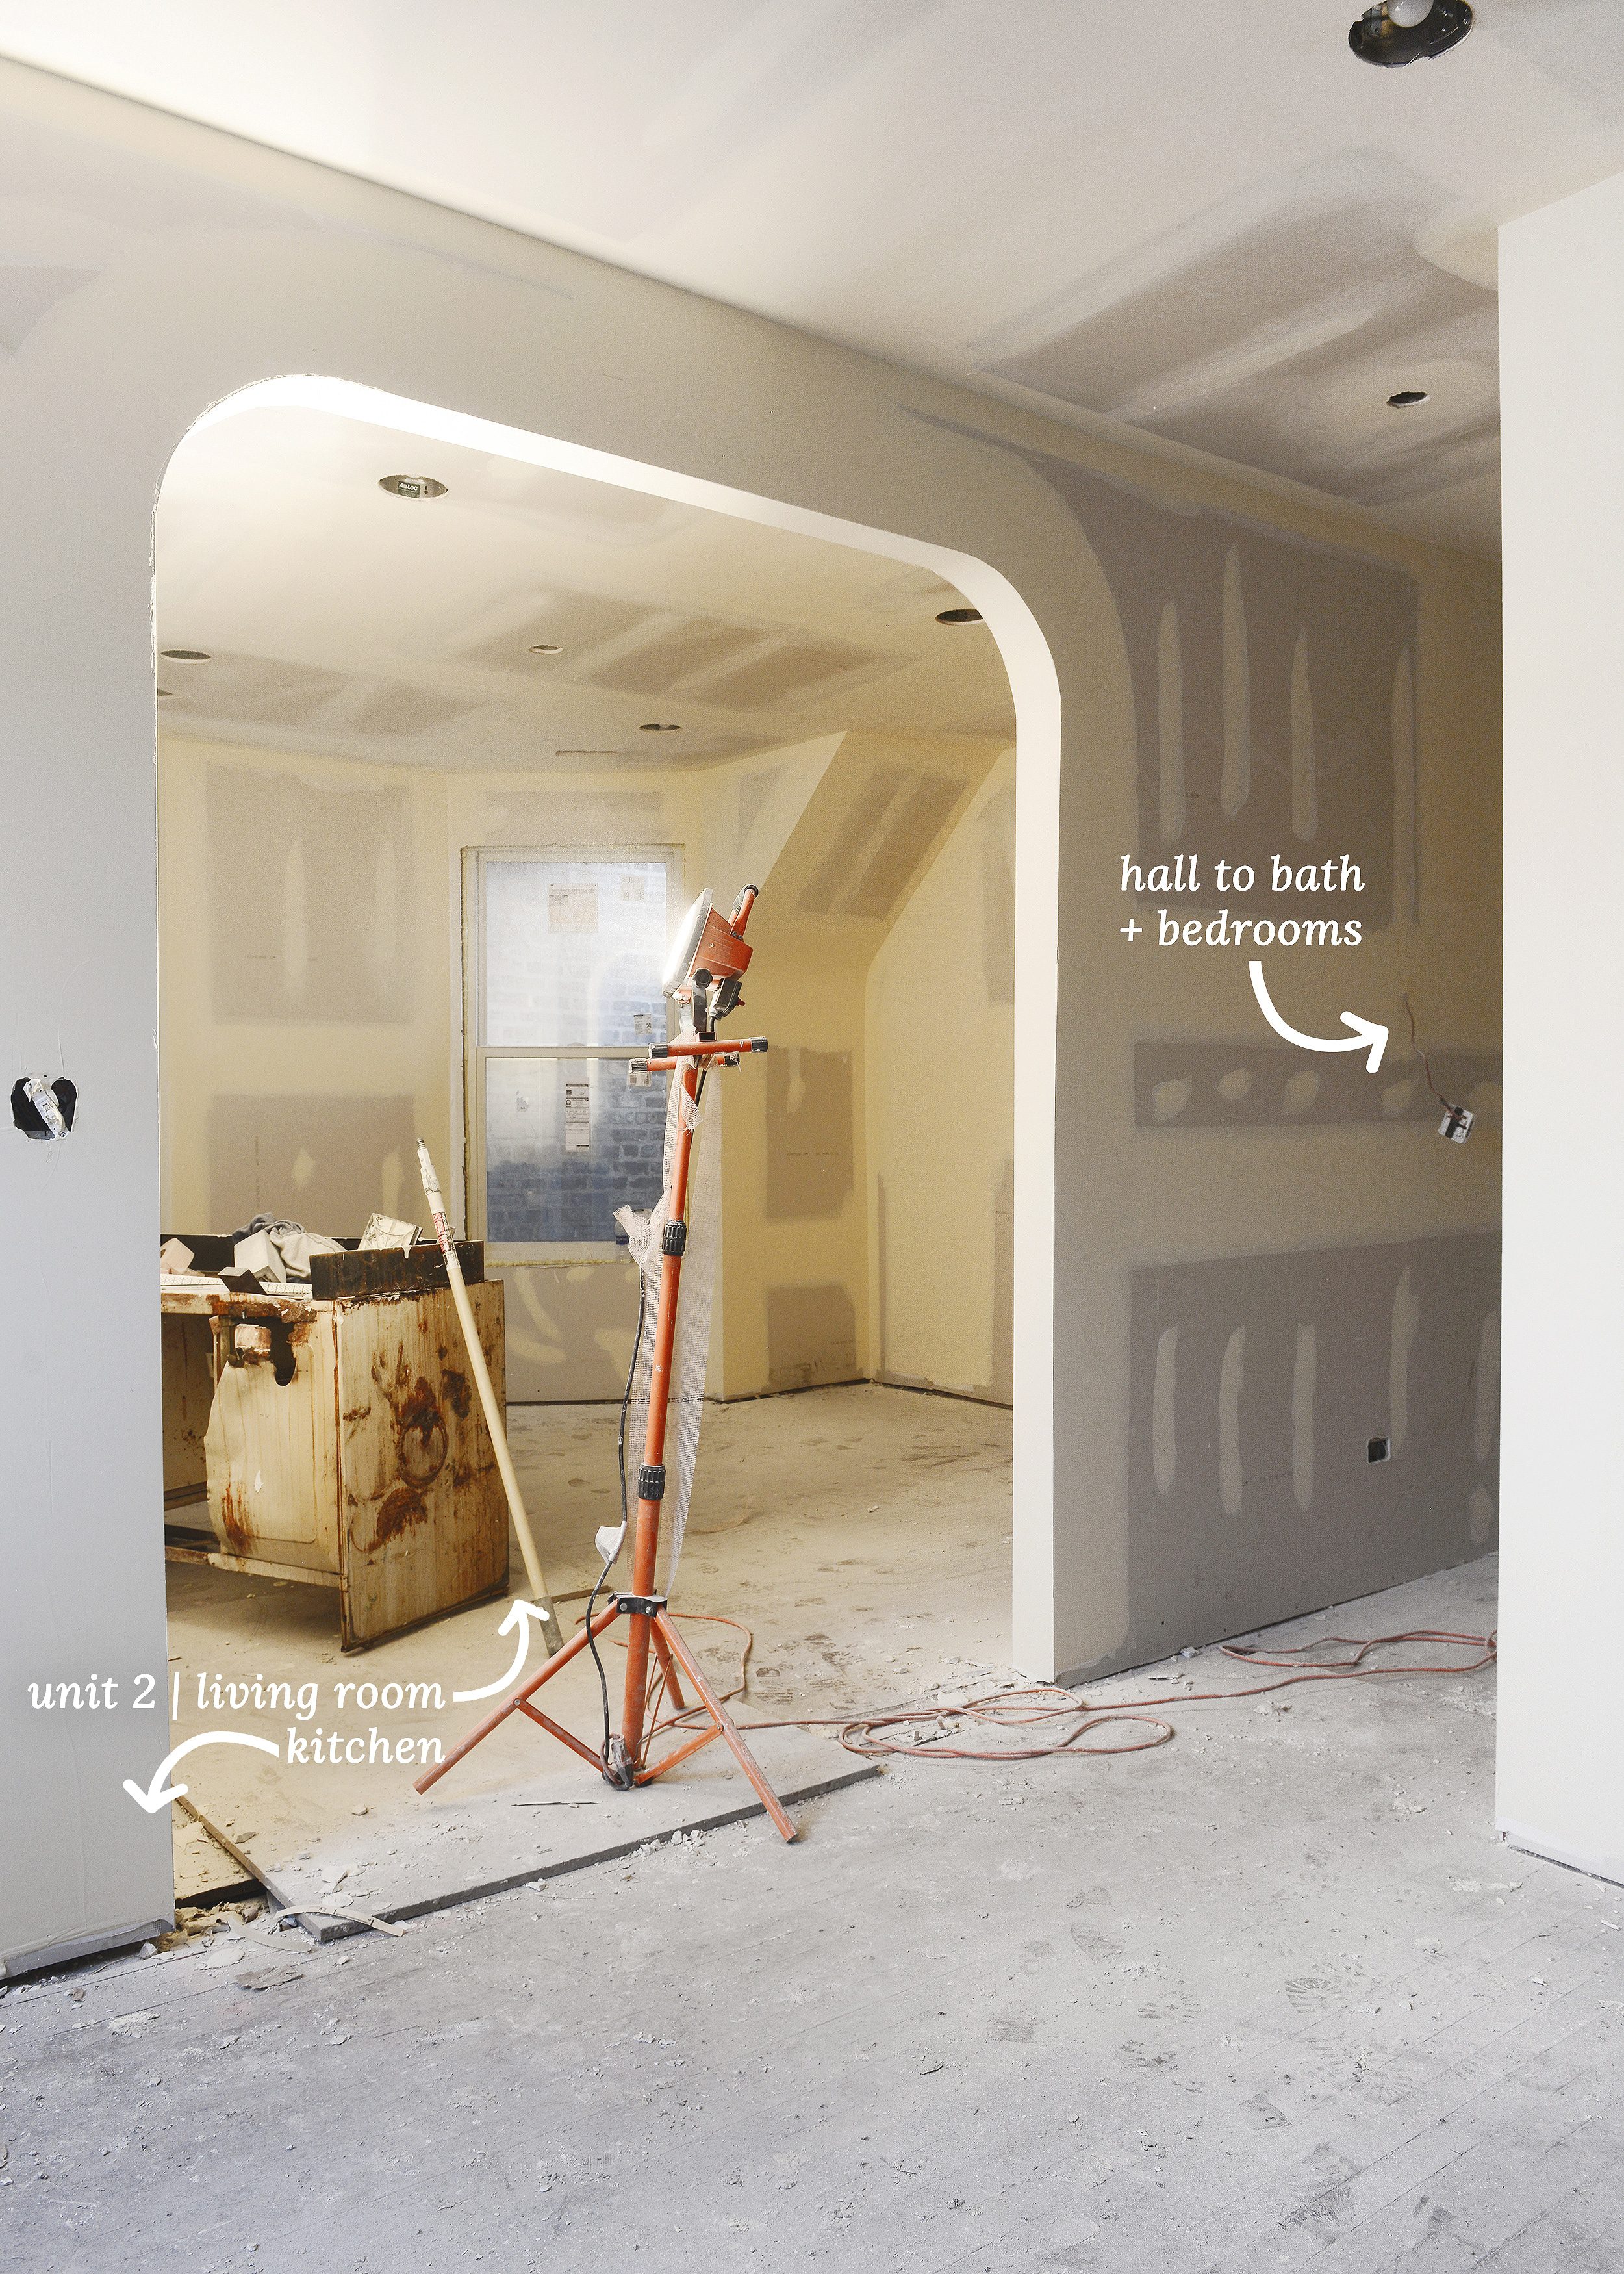 A freshly drywalled arch between a living room and kitchen under construction // via Yellow Brick Home